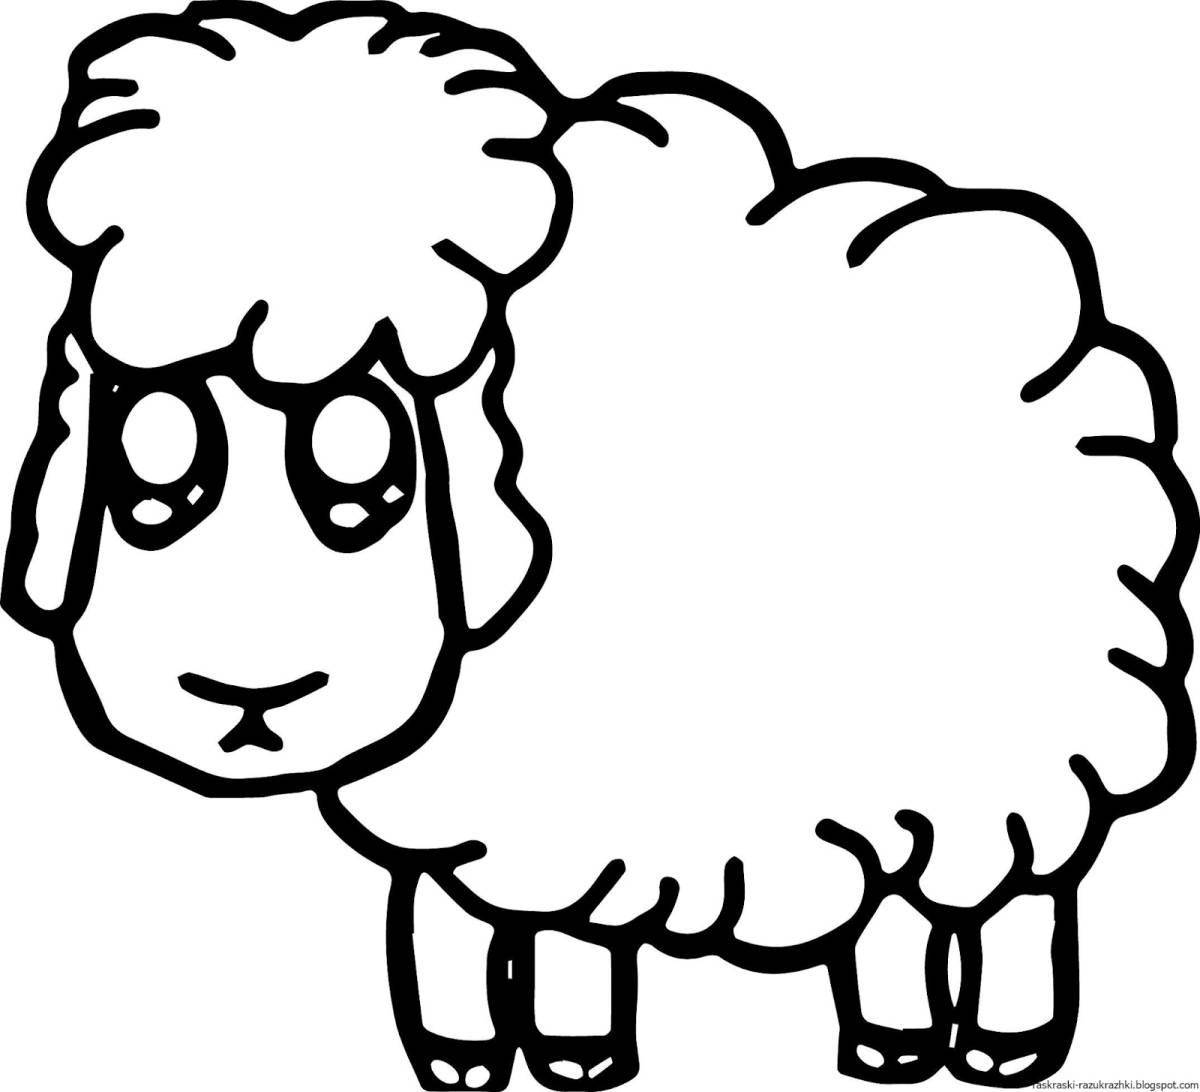 Sweet sheep coloring book for children 2-3 years old